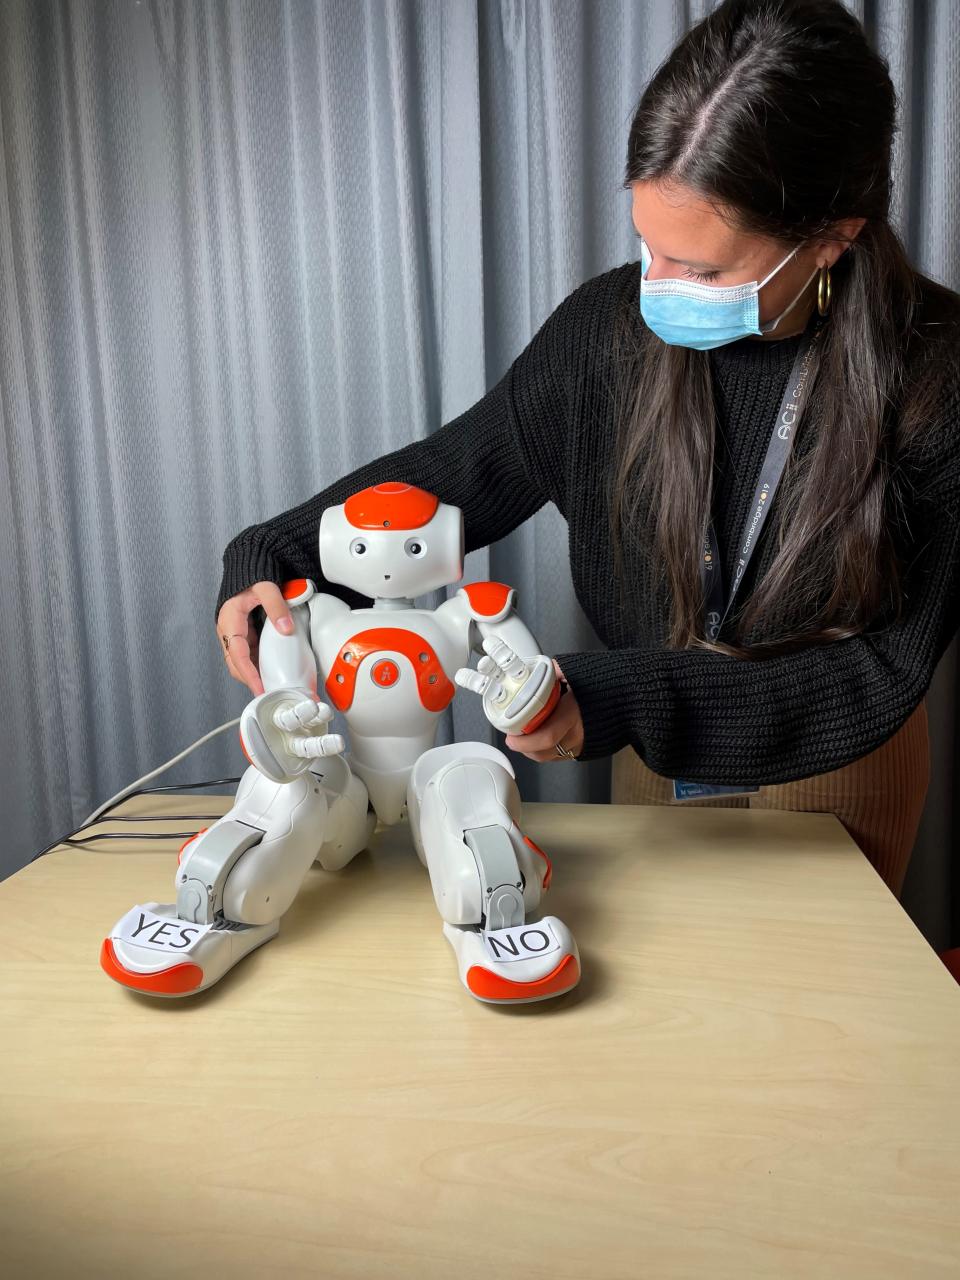 Children interacted with the robot by speaking with it, or by touching sensors on the robot’s hands and feet. (Cambridge University/ PA)